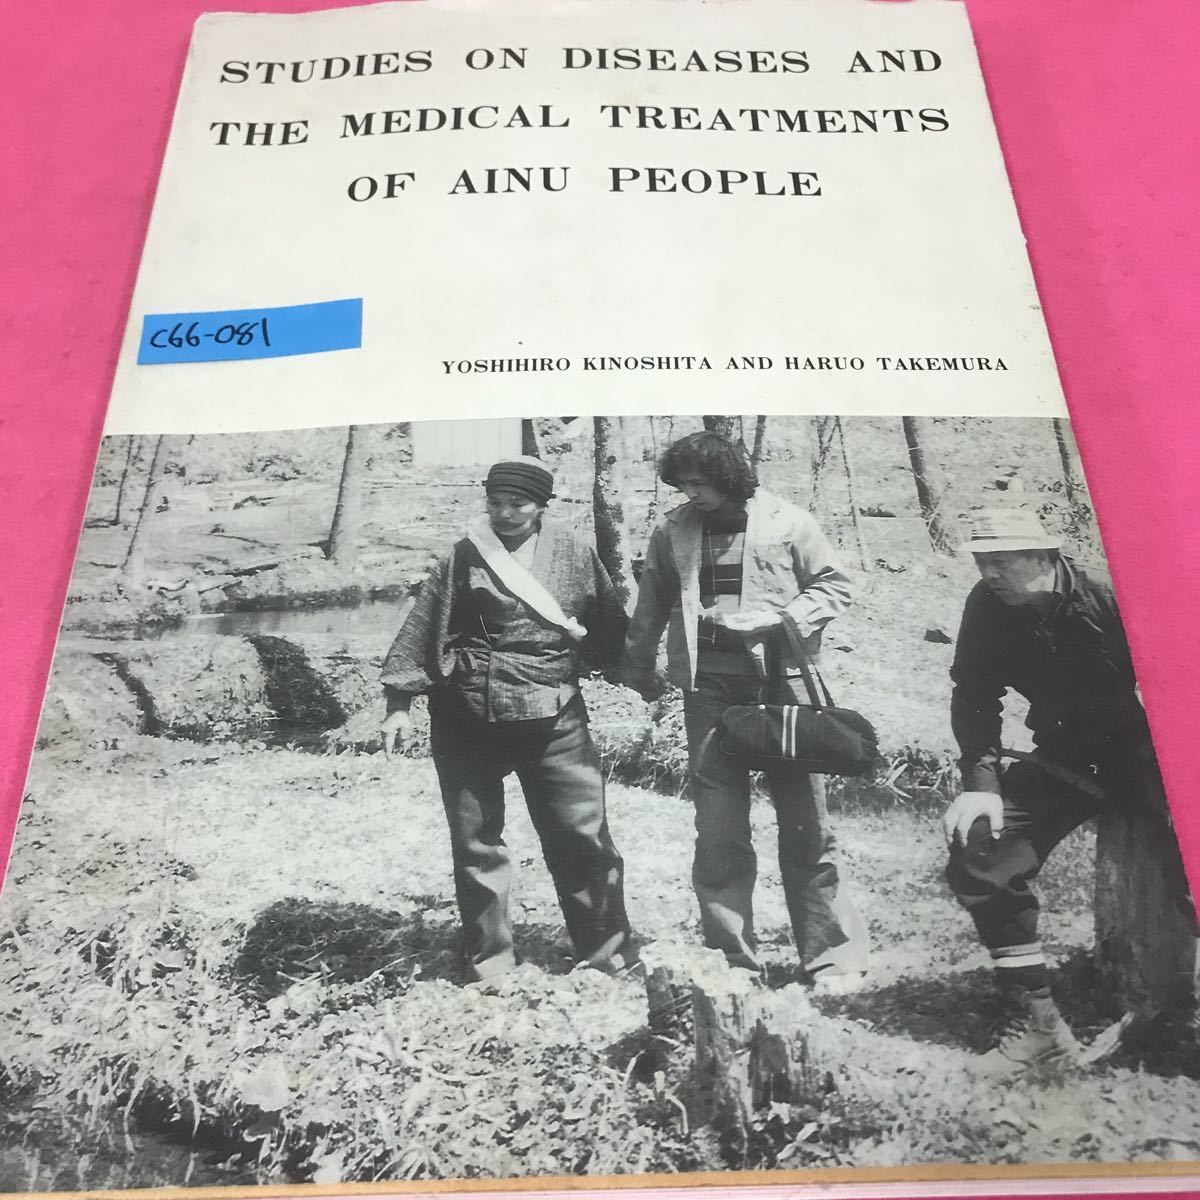 C66-081 洋書 STUDIES ON DISEASES AND THE MEDICAL TREATMENTS OF AINU PEOPLE 外国語書籍 書き込みあり_画像1